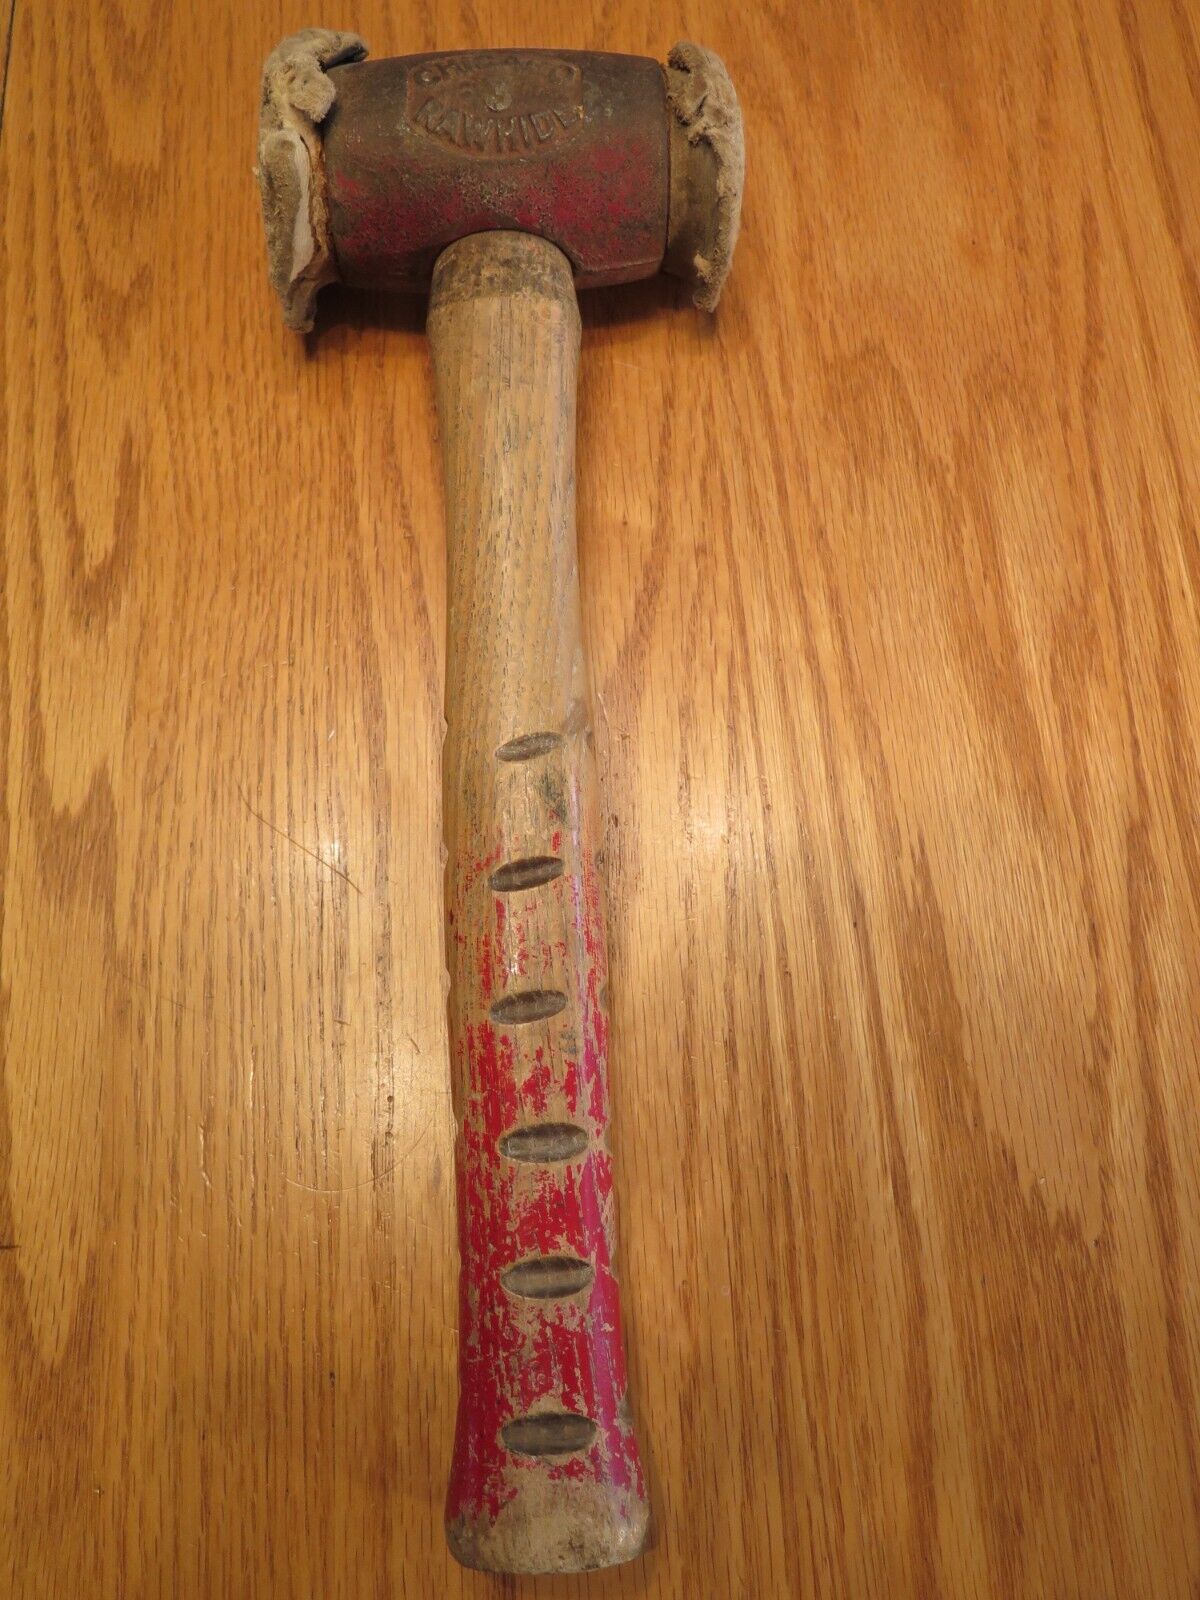 Vintage Chicago Rawhide C/R No. 3 Leather Mallet Hammer USA